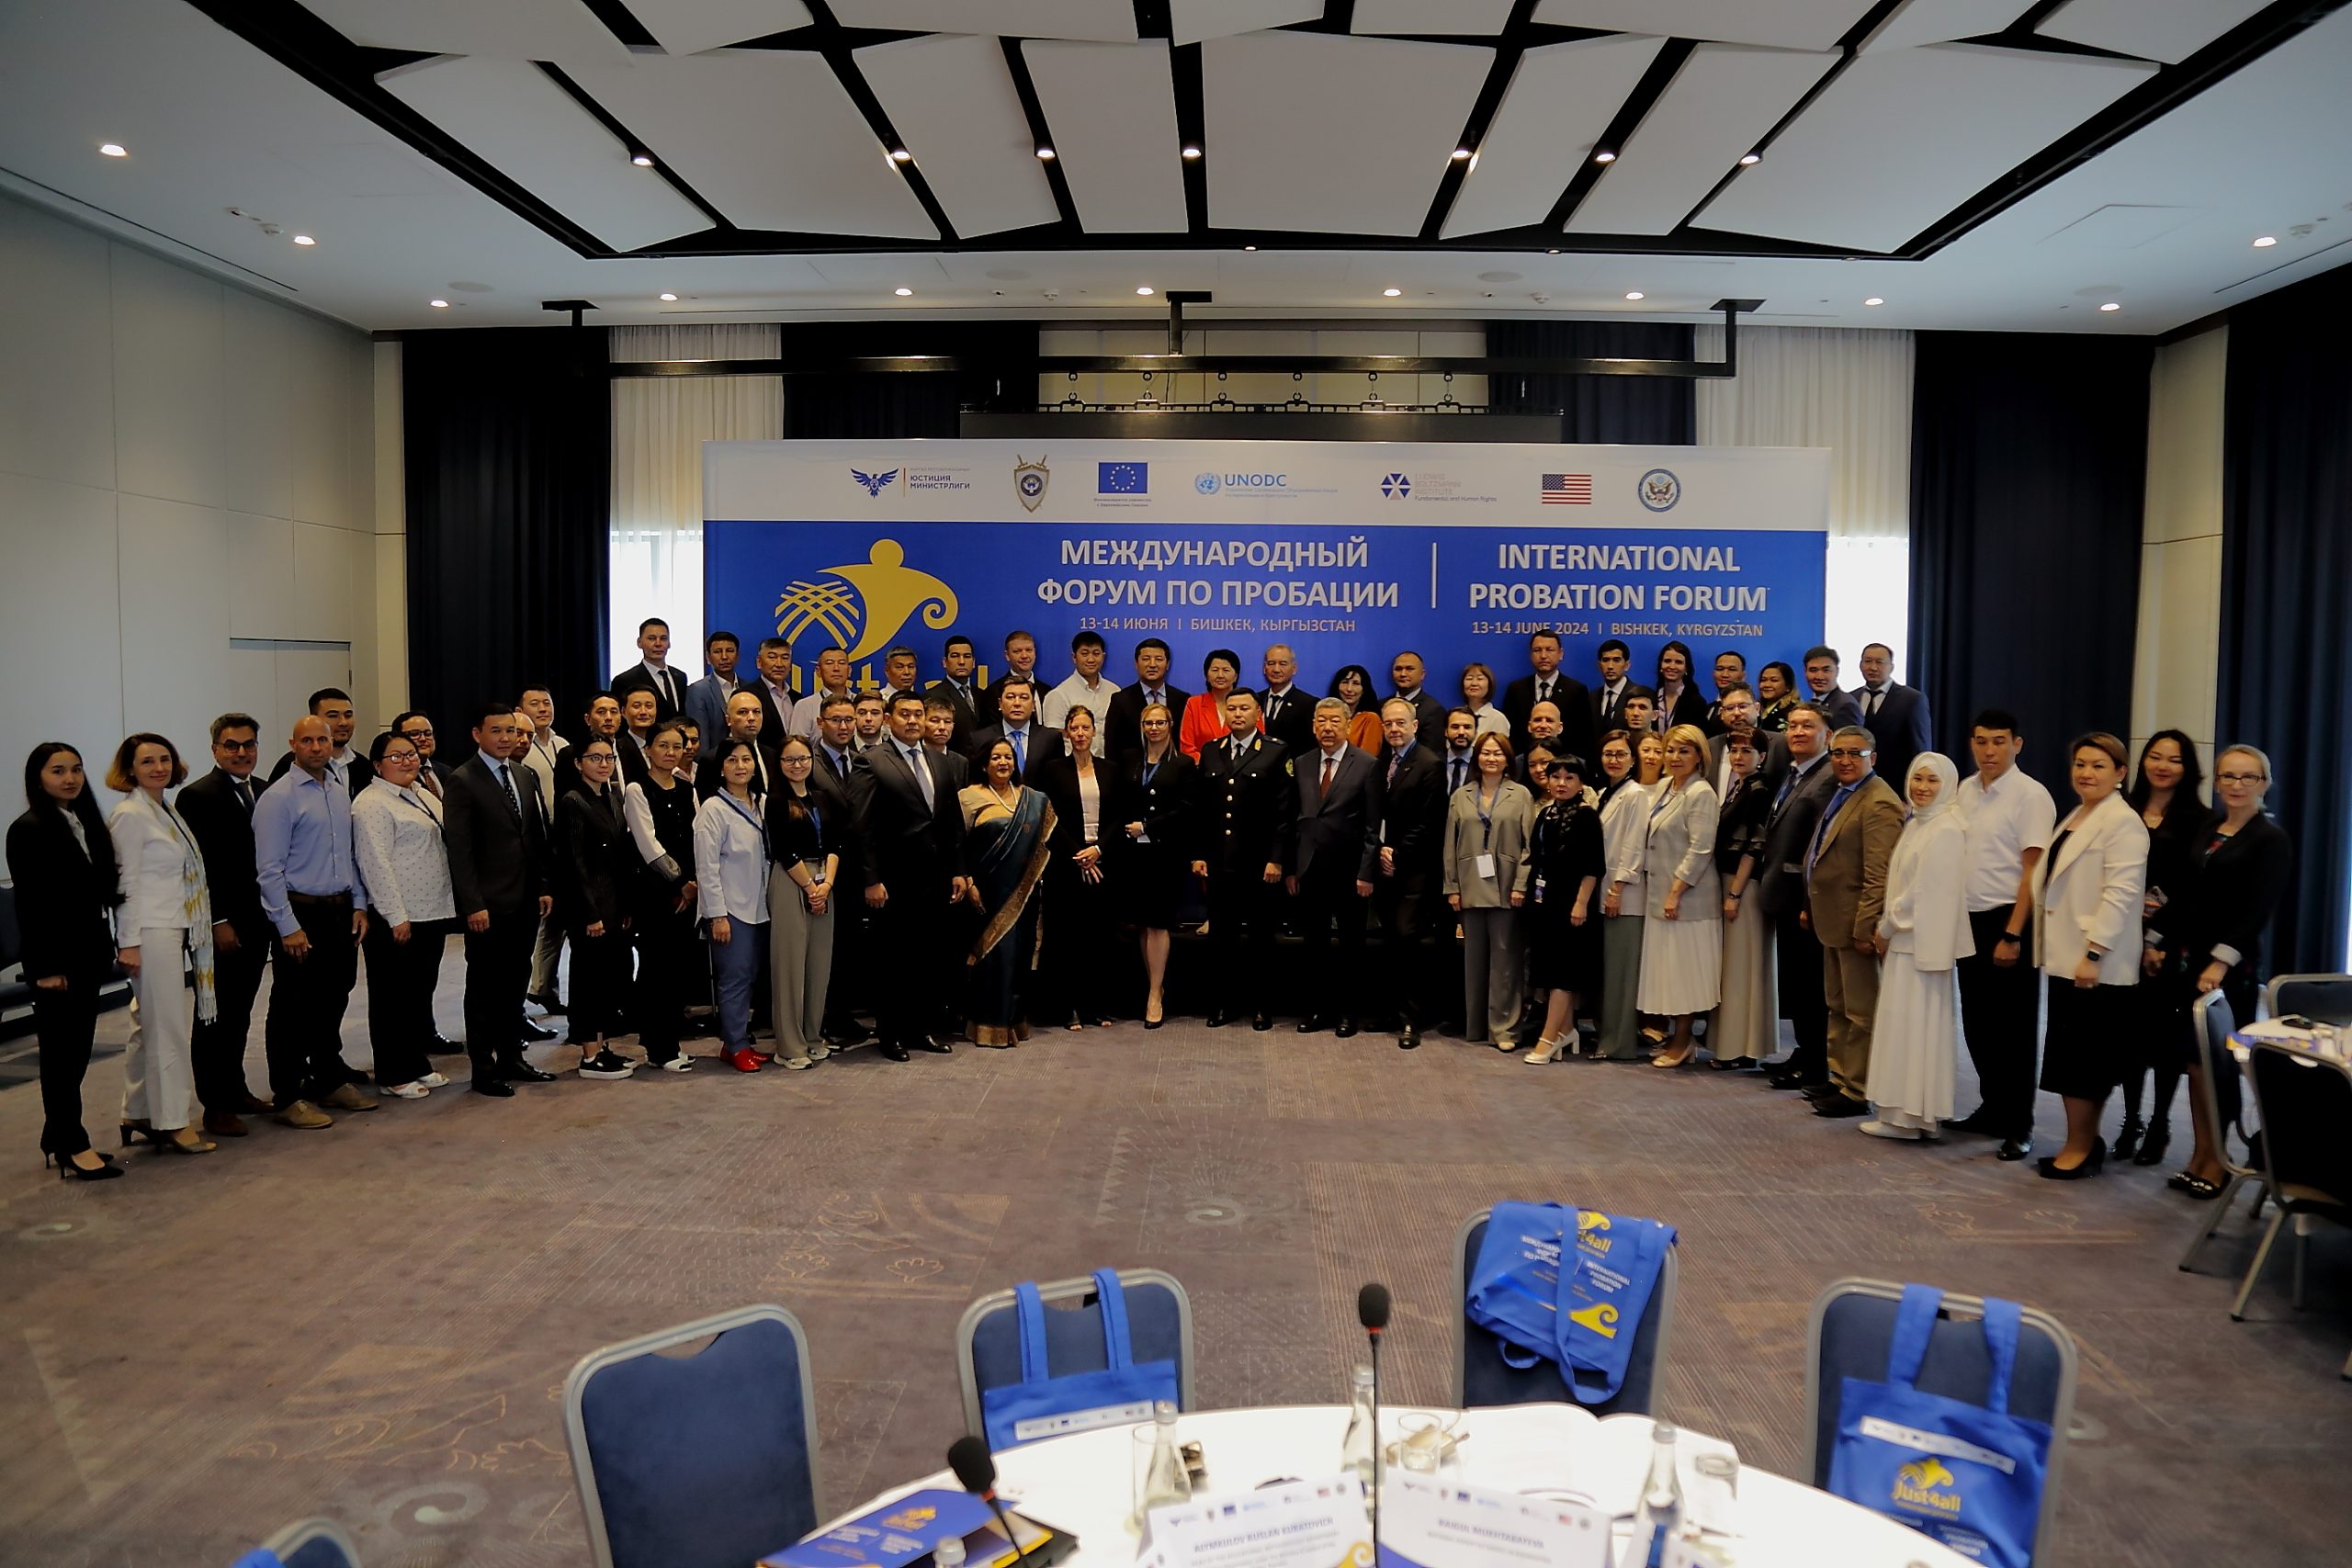 International Experts Discussed On Advancing Probation Reform